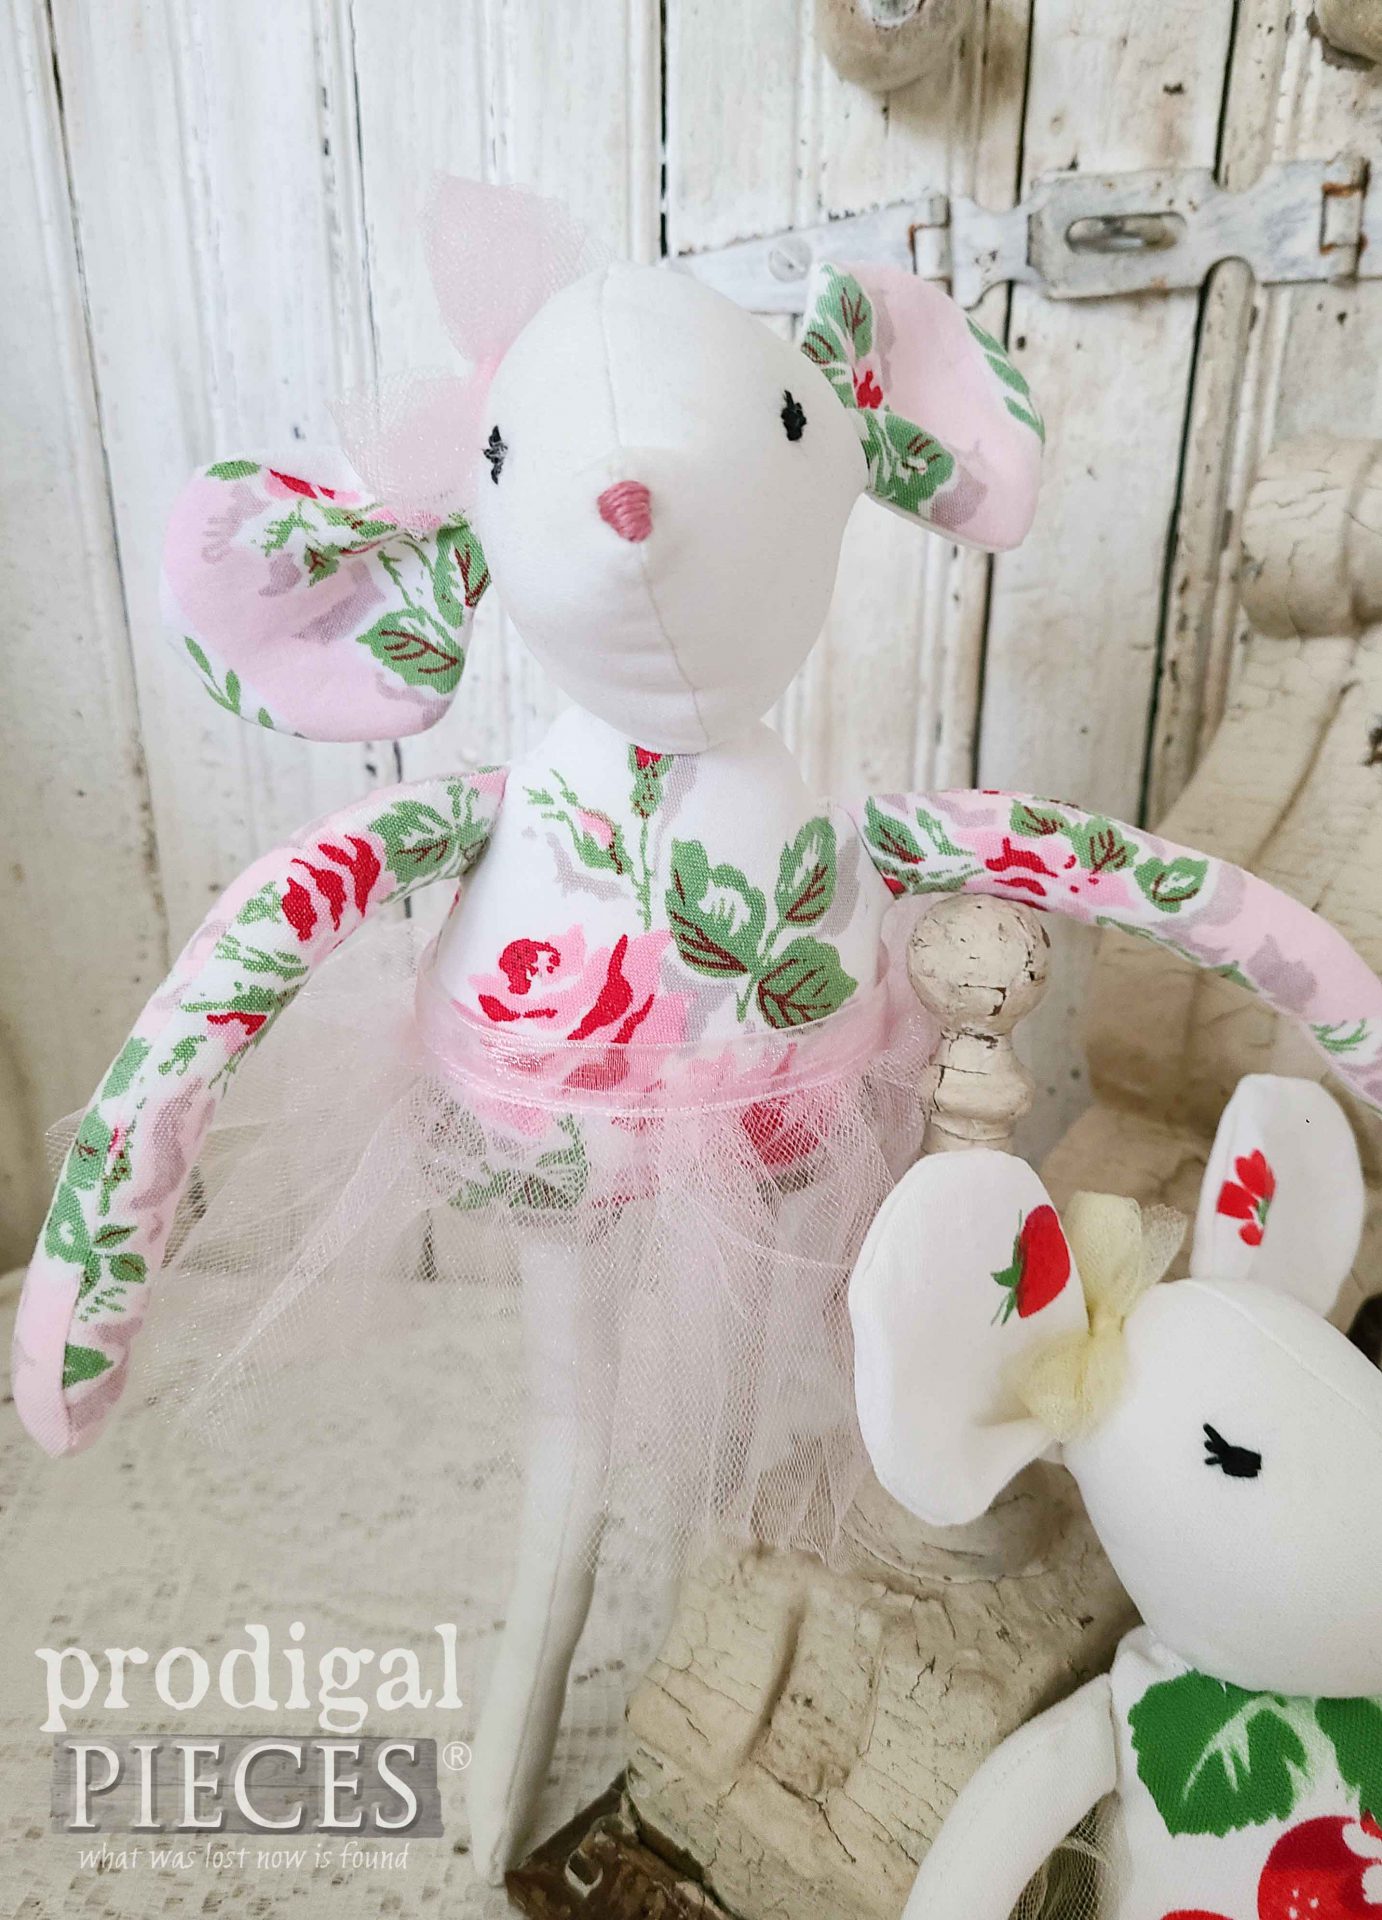 DIY Ballerina Mouse Doll with Roses by Larissa of Prodigal Pieces | prodigalpieces.com #prodigalpieces #toy #kids #ballerina